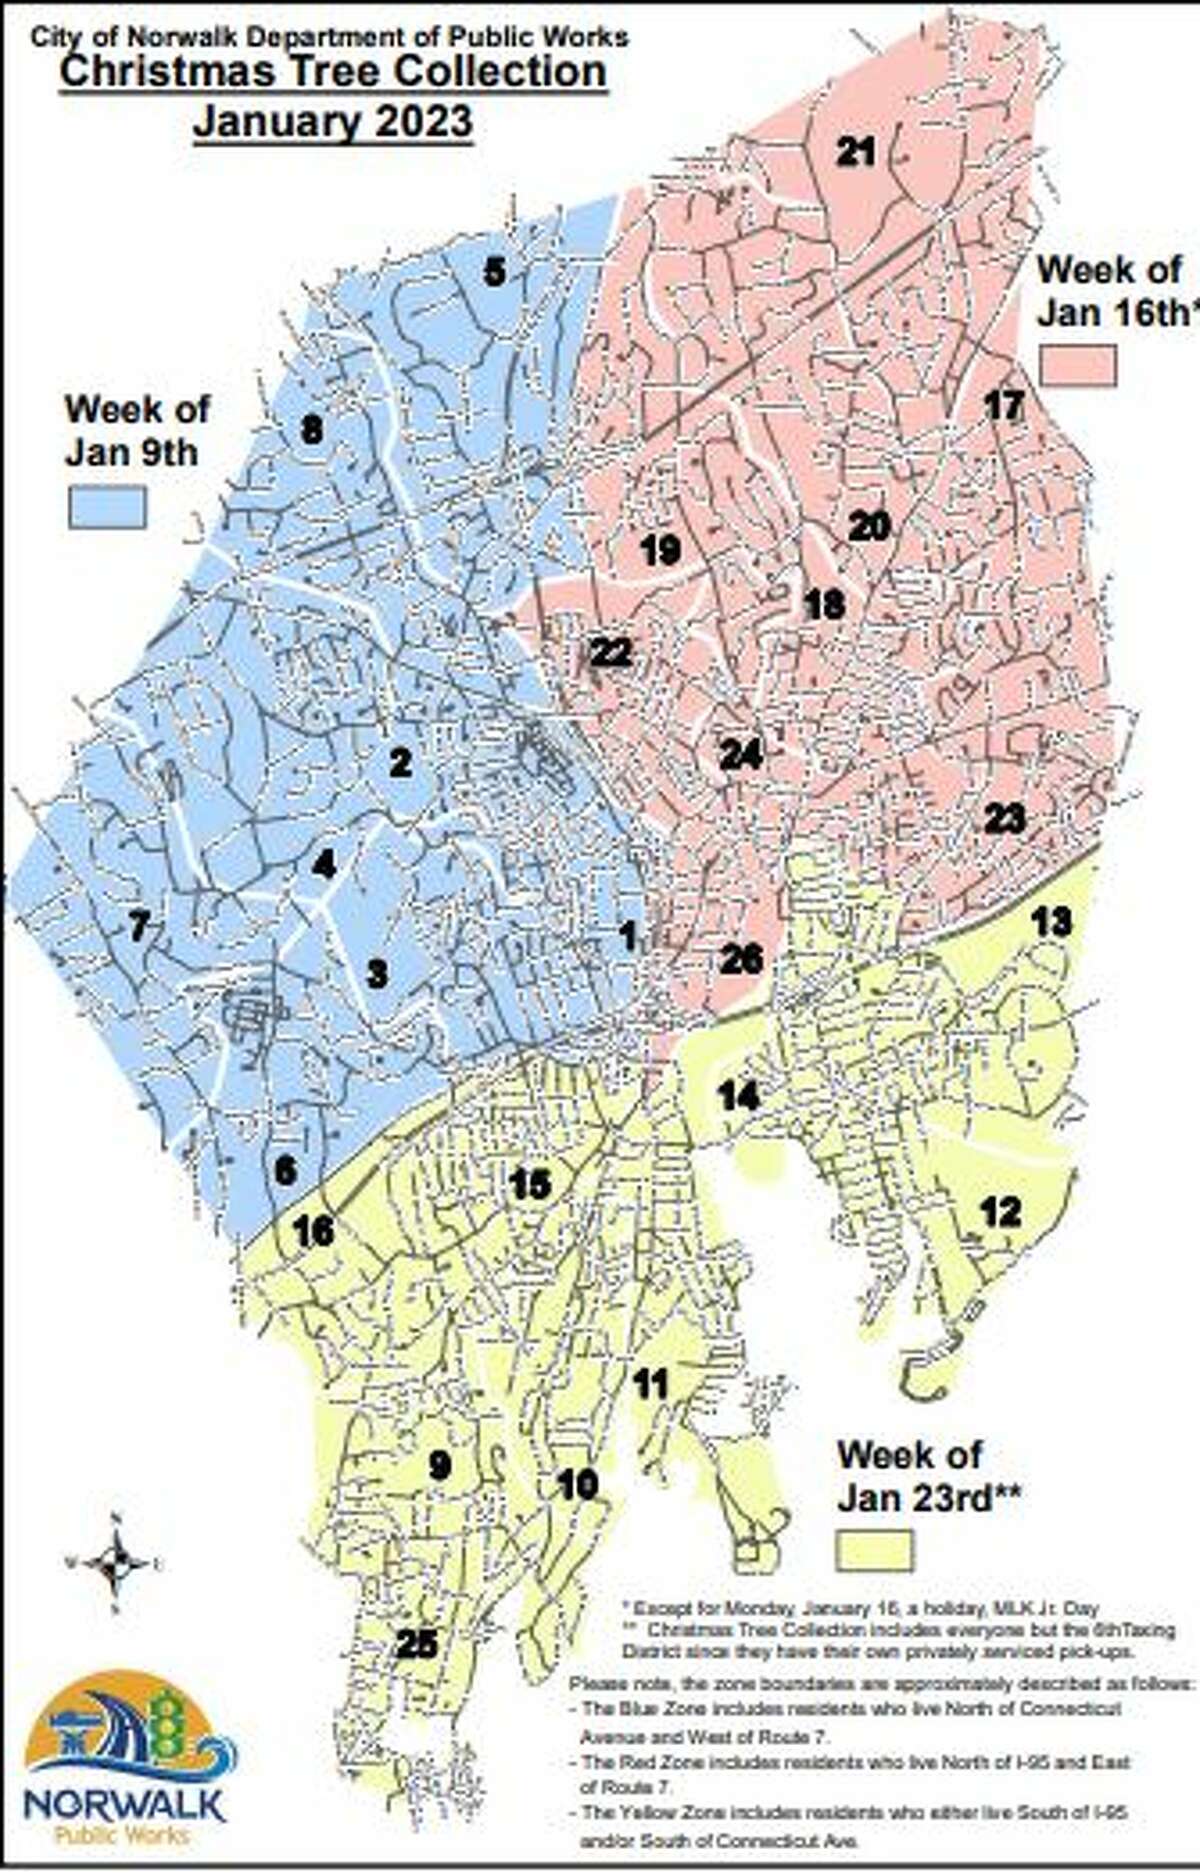 The map of Norwalk shows the different weeks of Christmas tree pickups in January. 